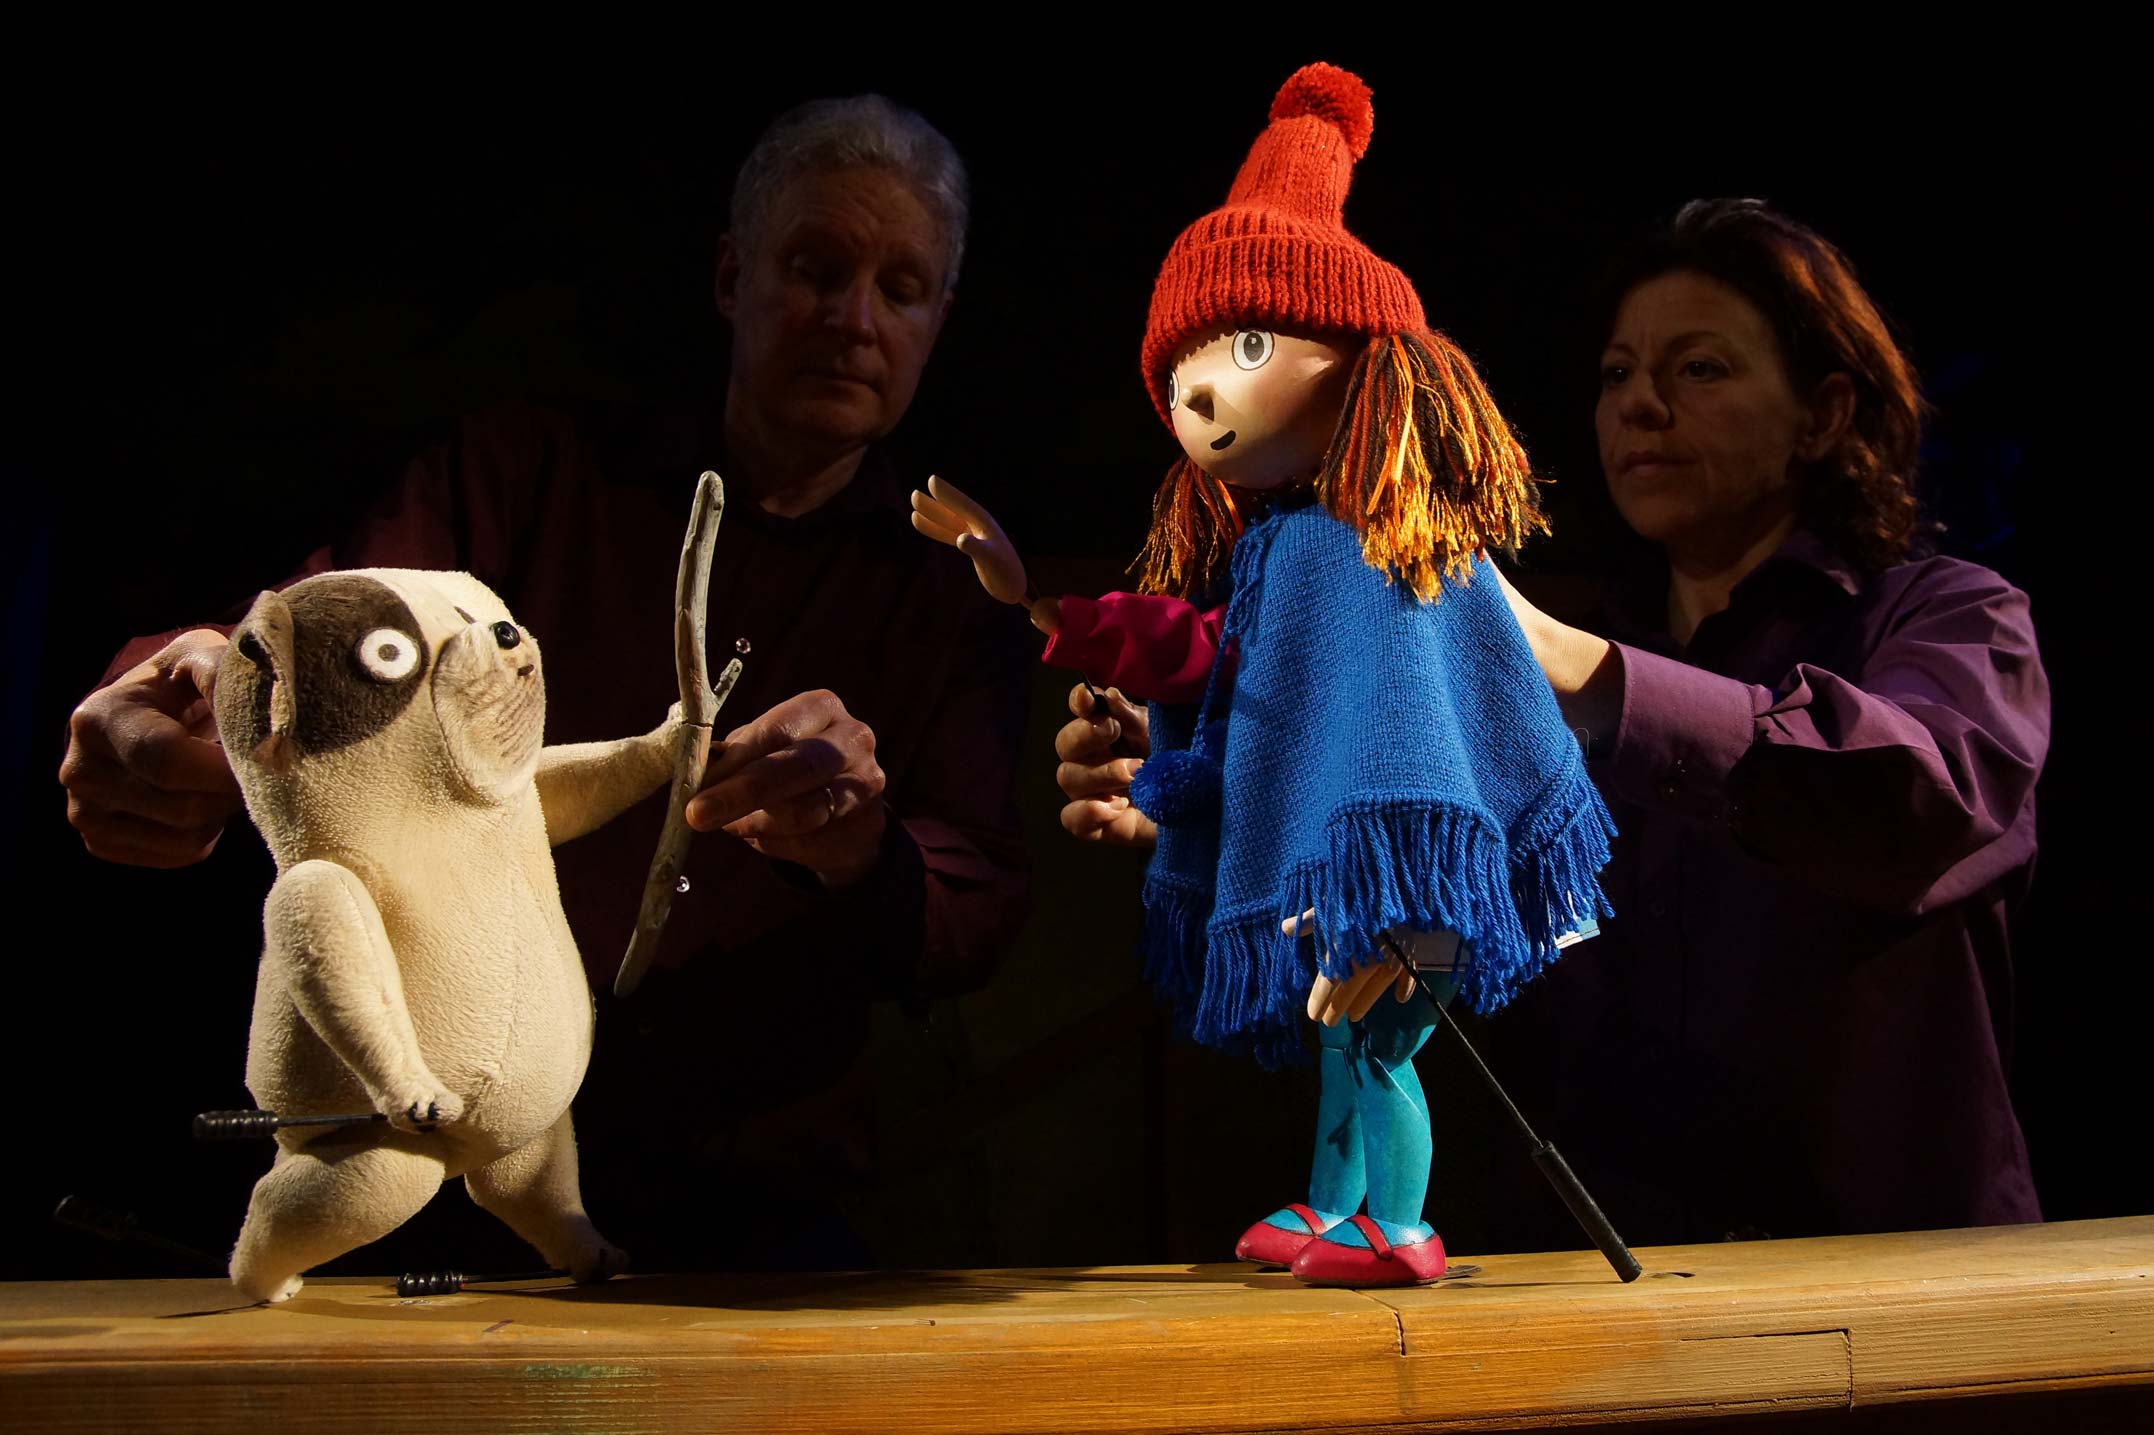 Two puppeteers hold puppets of Biff, a small dog, and Anna, a young girl wearing an orange hat and a blue knitted poncho.